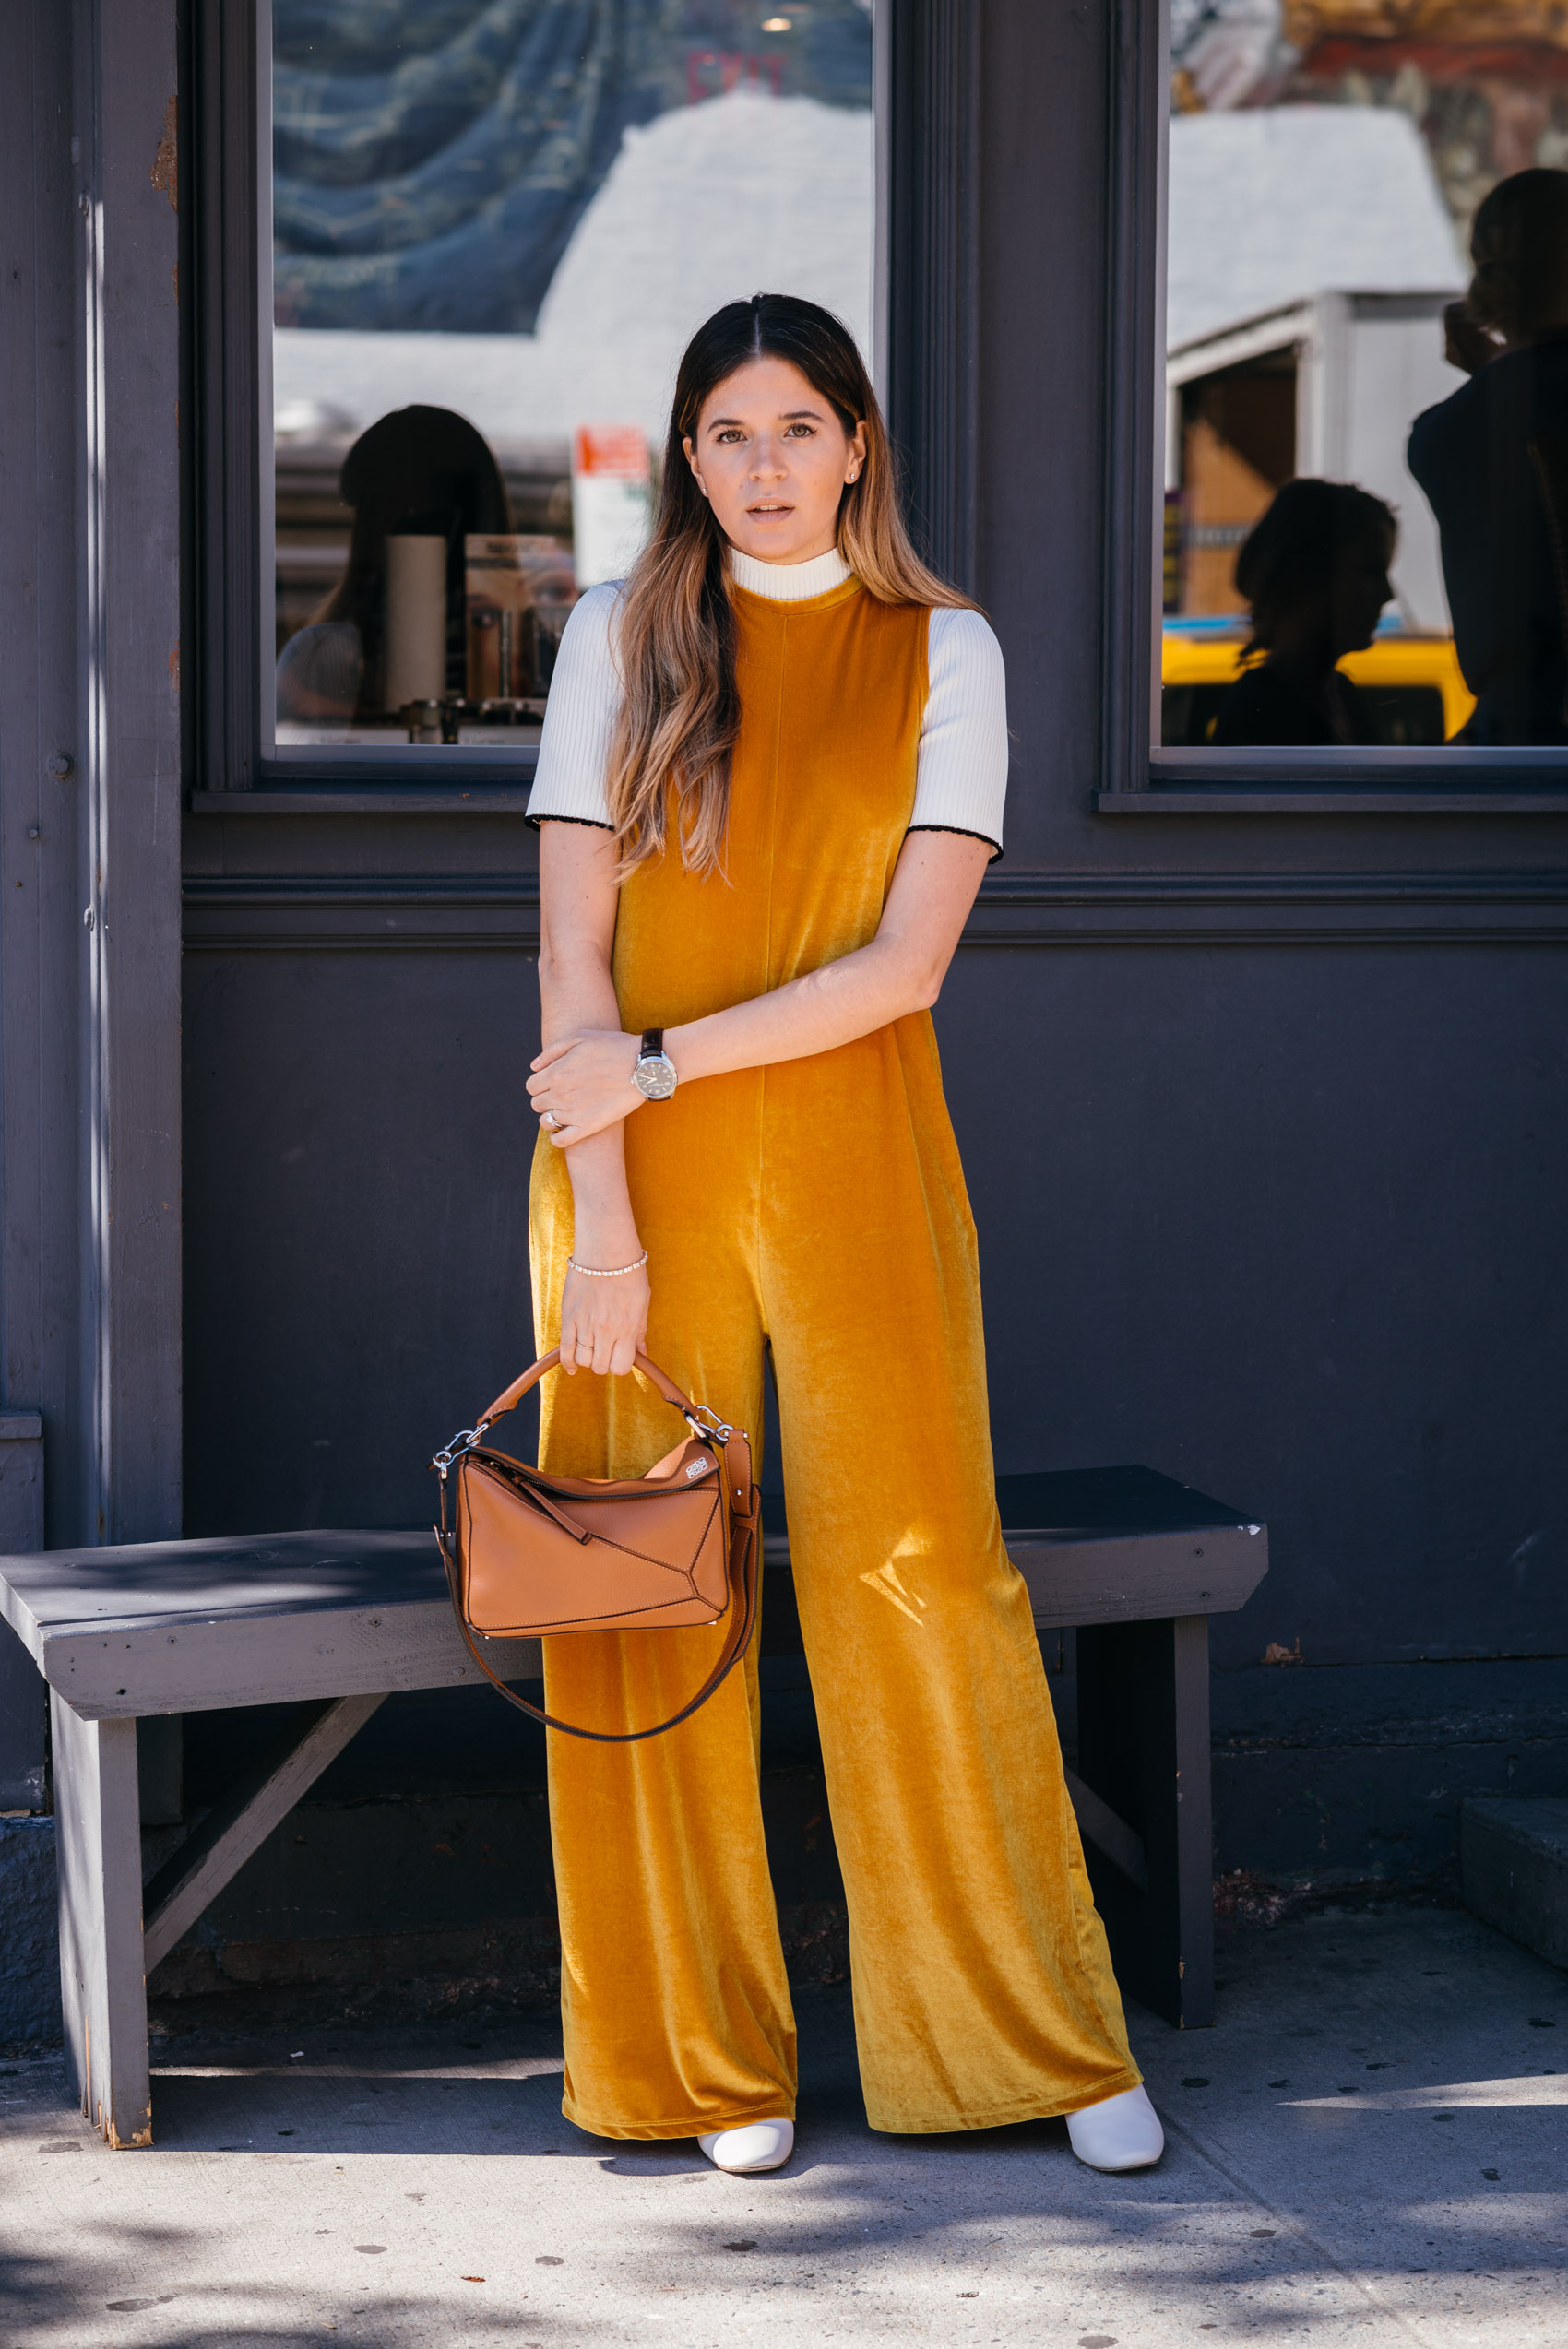 Maristella wearing a Zara TRF yellow velvet jumpsuit, contrast sleeves knit sweater, white boots and Loewe Puzzle bag in NYFW